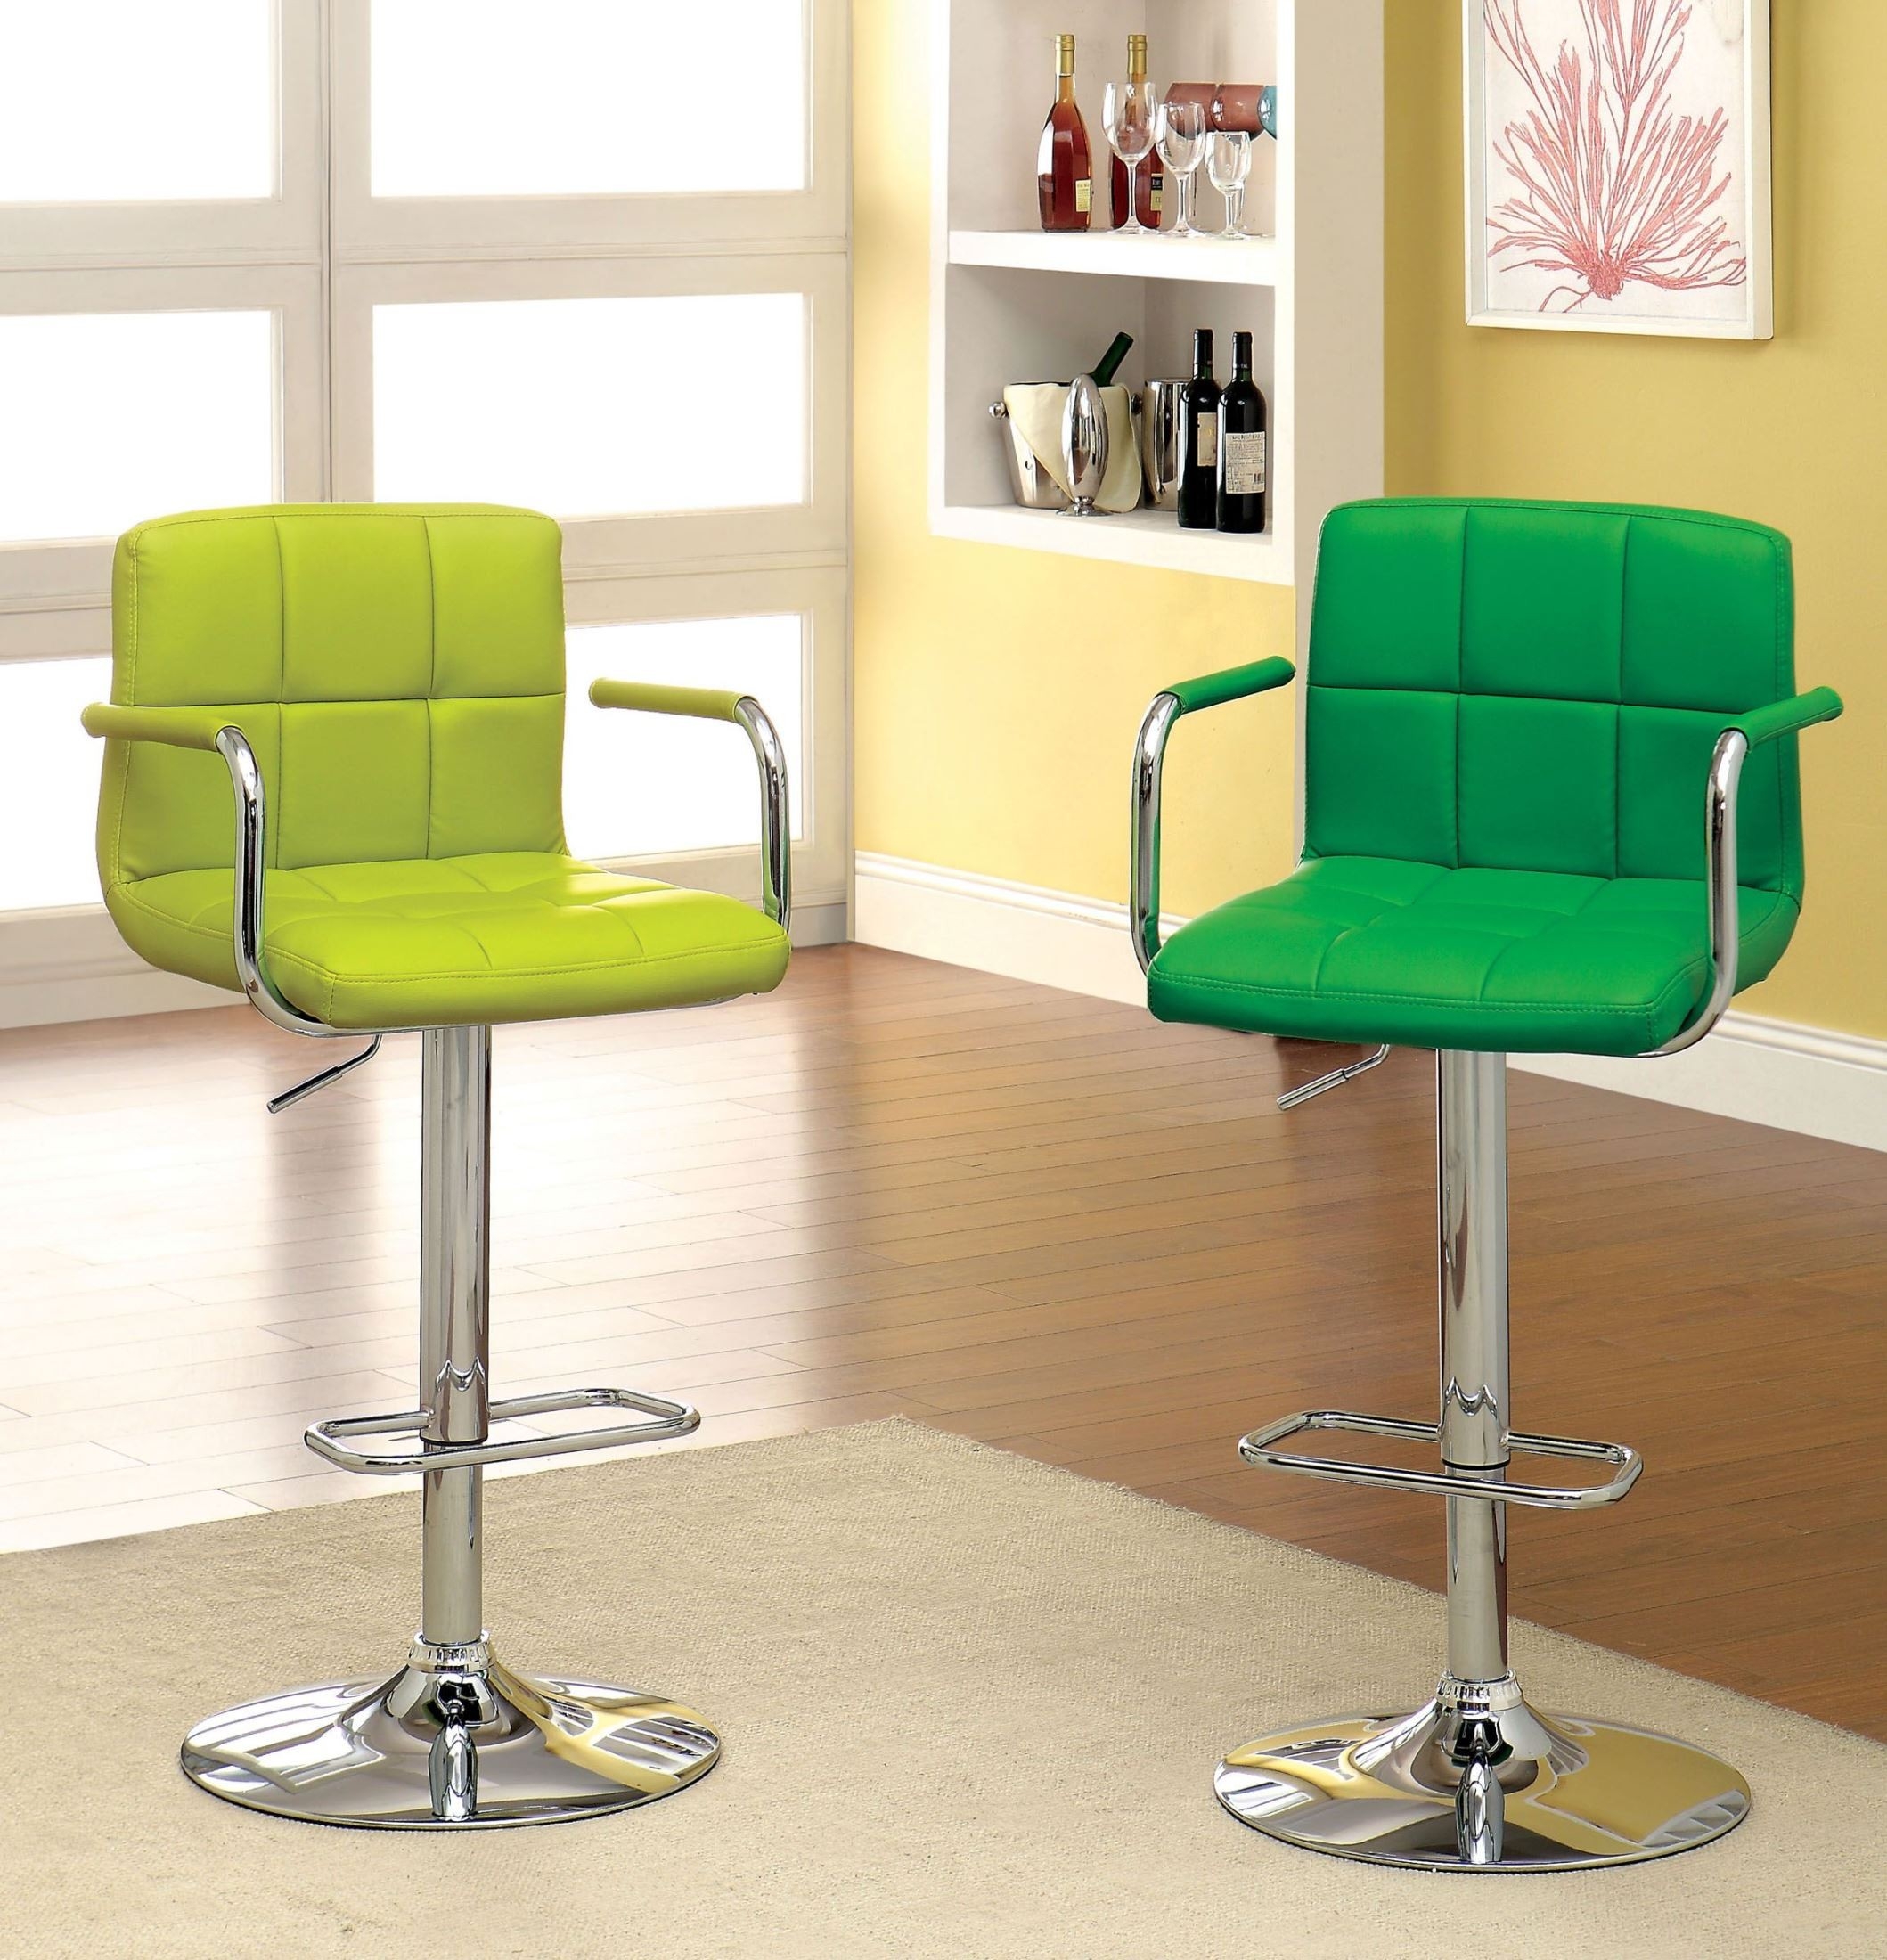 Lime green leather bar stools